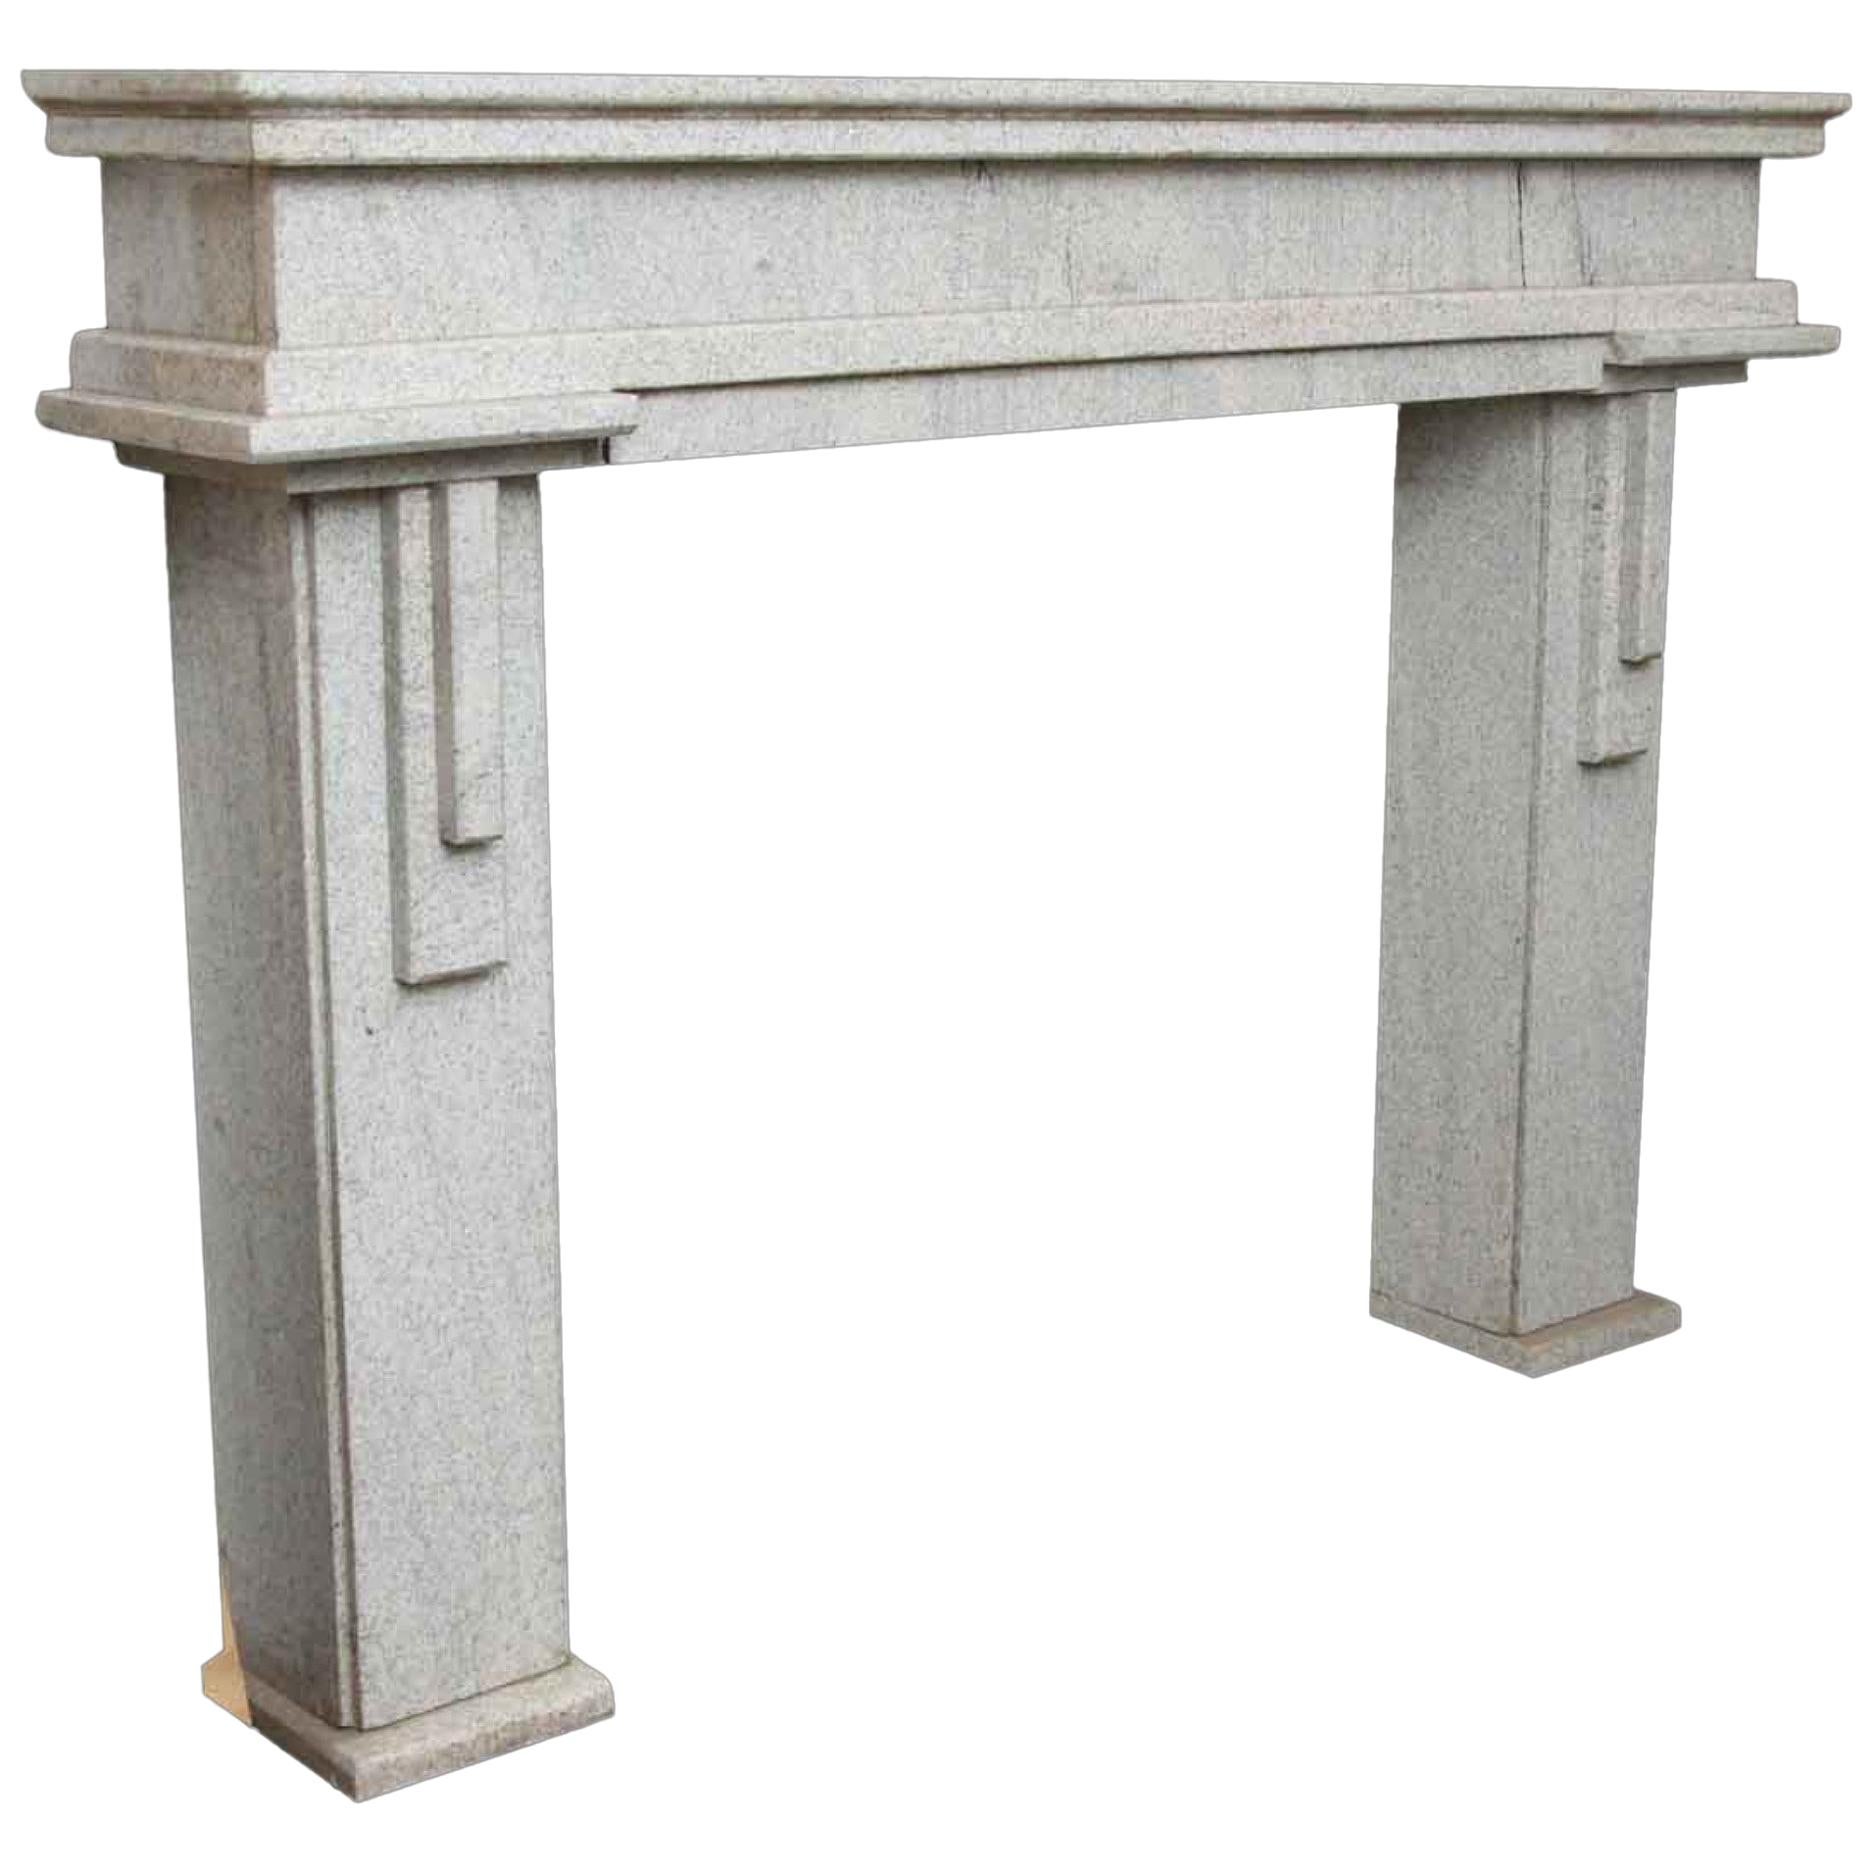 1930s Carved Granite Mantel with Art Deco or Geometric Design